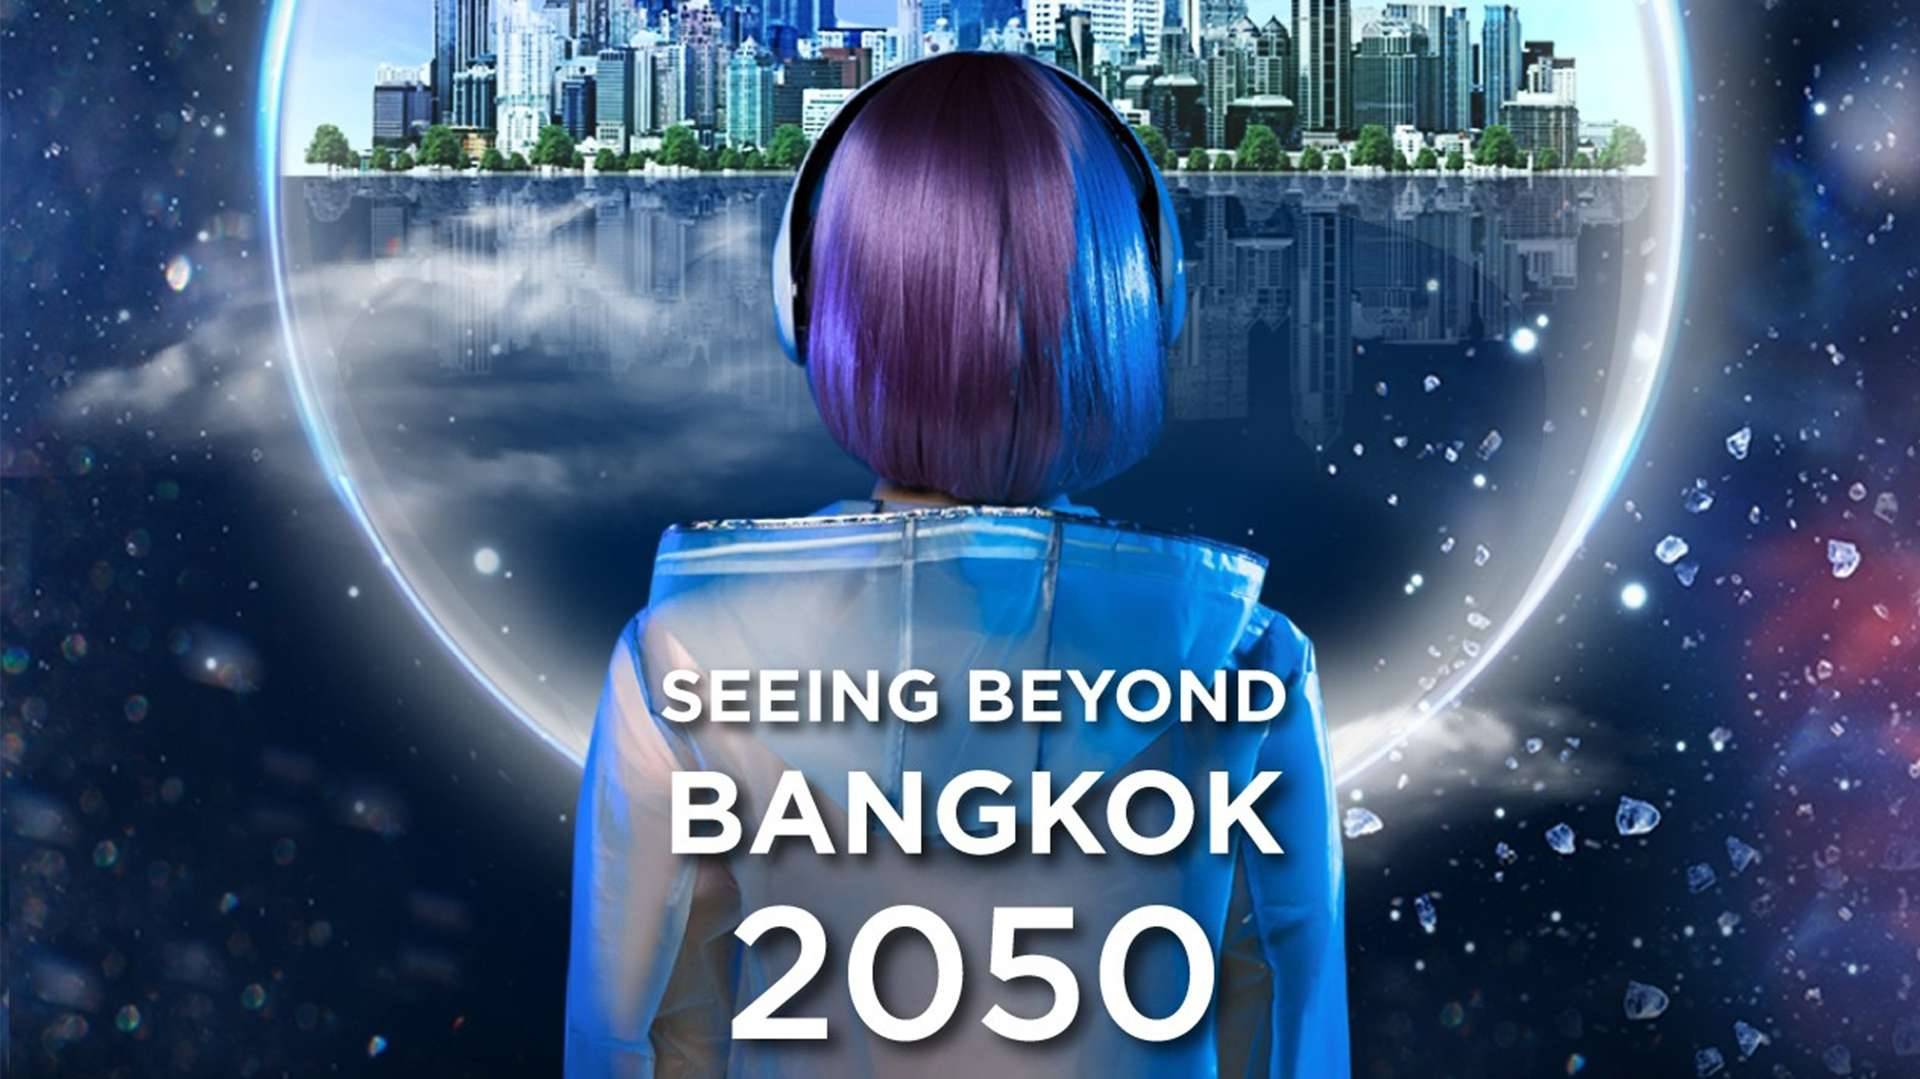 FutureTales Lab by MQDC Reveals 7 Megatrends for Bangkok in 2050